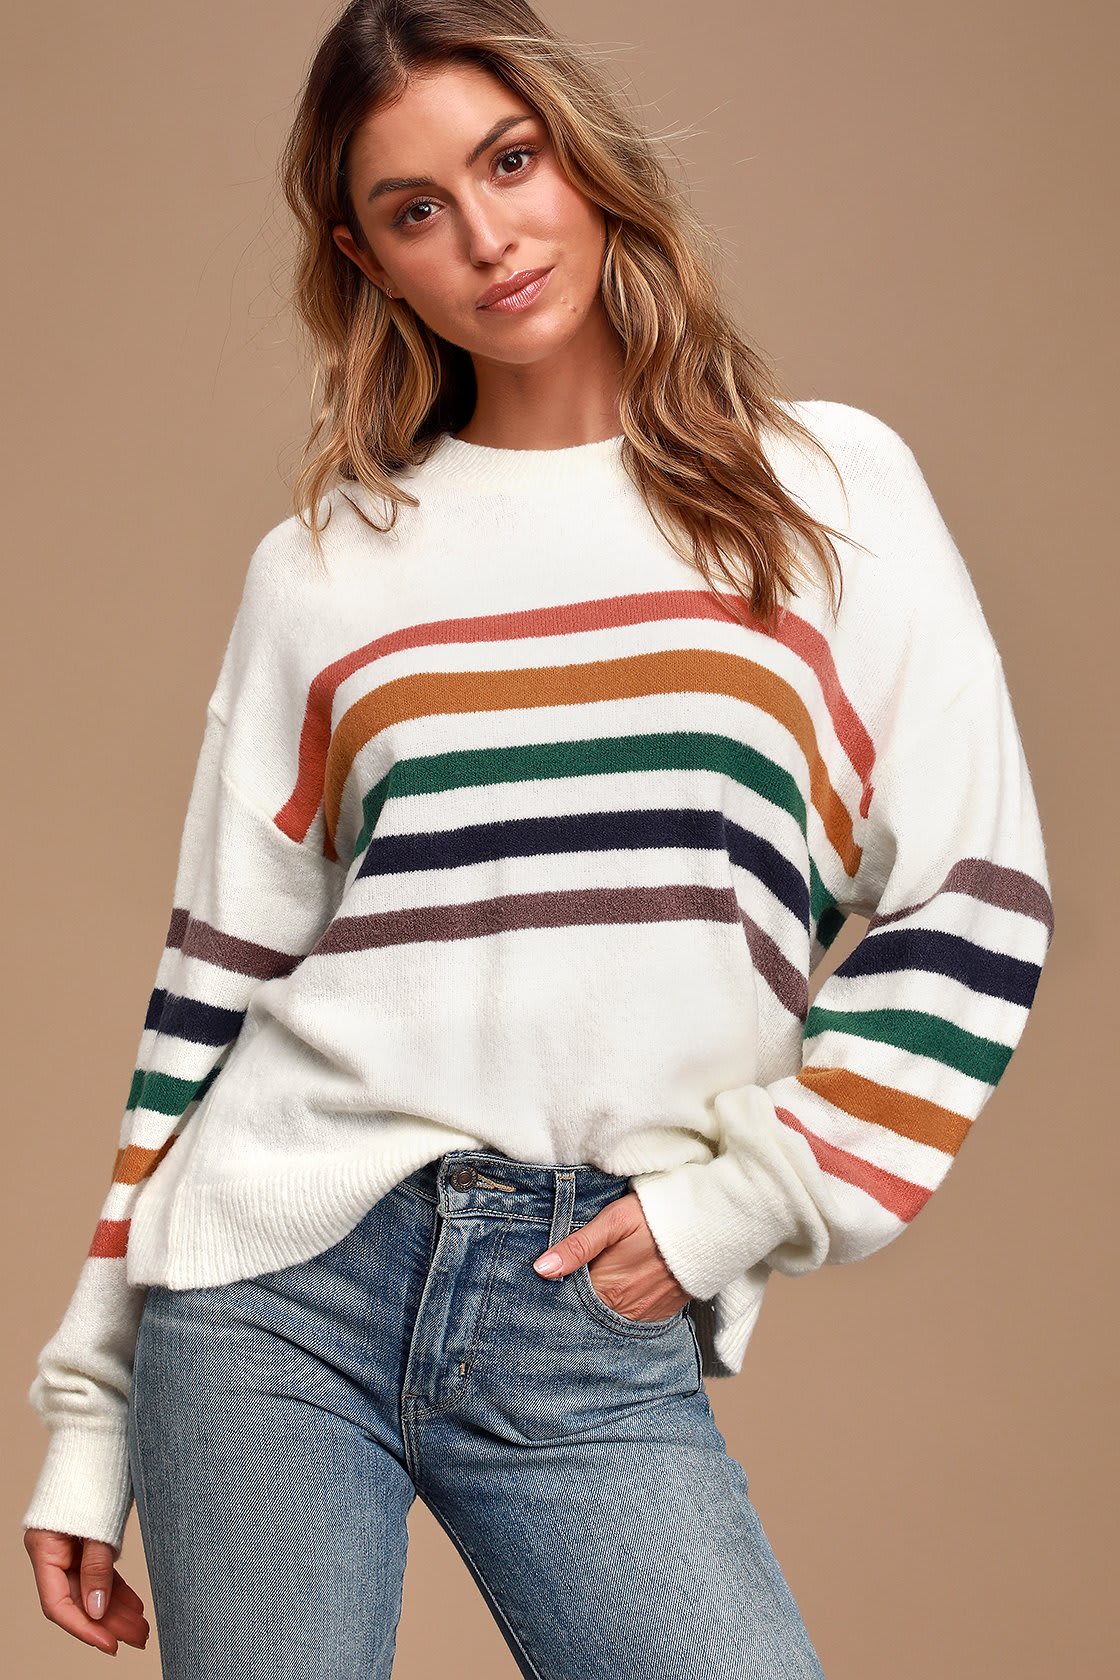 The Best Womens Sweaters for Winter 2022 Style - Lulus.com Fashion Blog